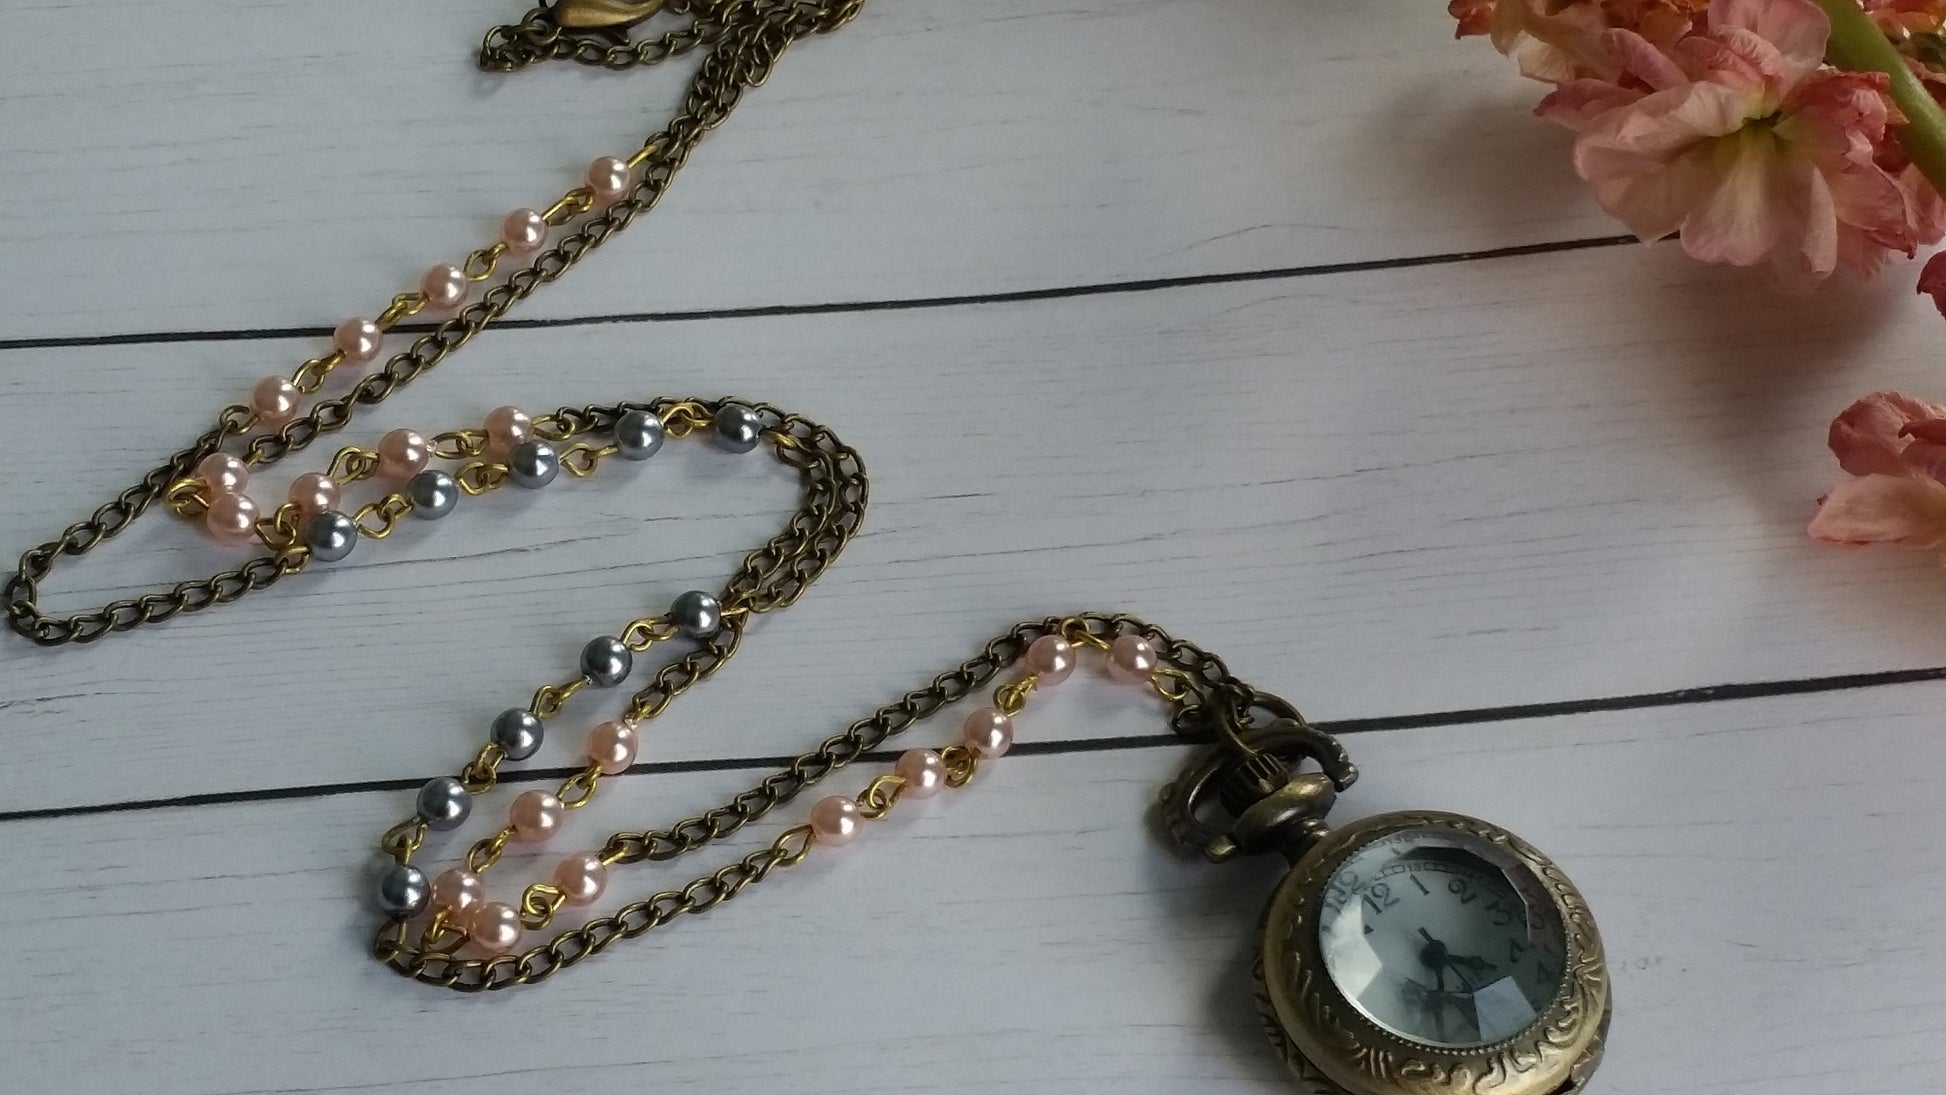 Ball Clock Necklace, Locket Necklace, Watch Necklace, Weddings, Victorian Watch Necklace, Beaded Chain, Free Shipping, Christmas in July